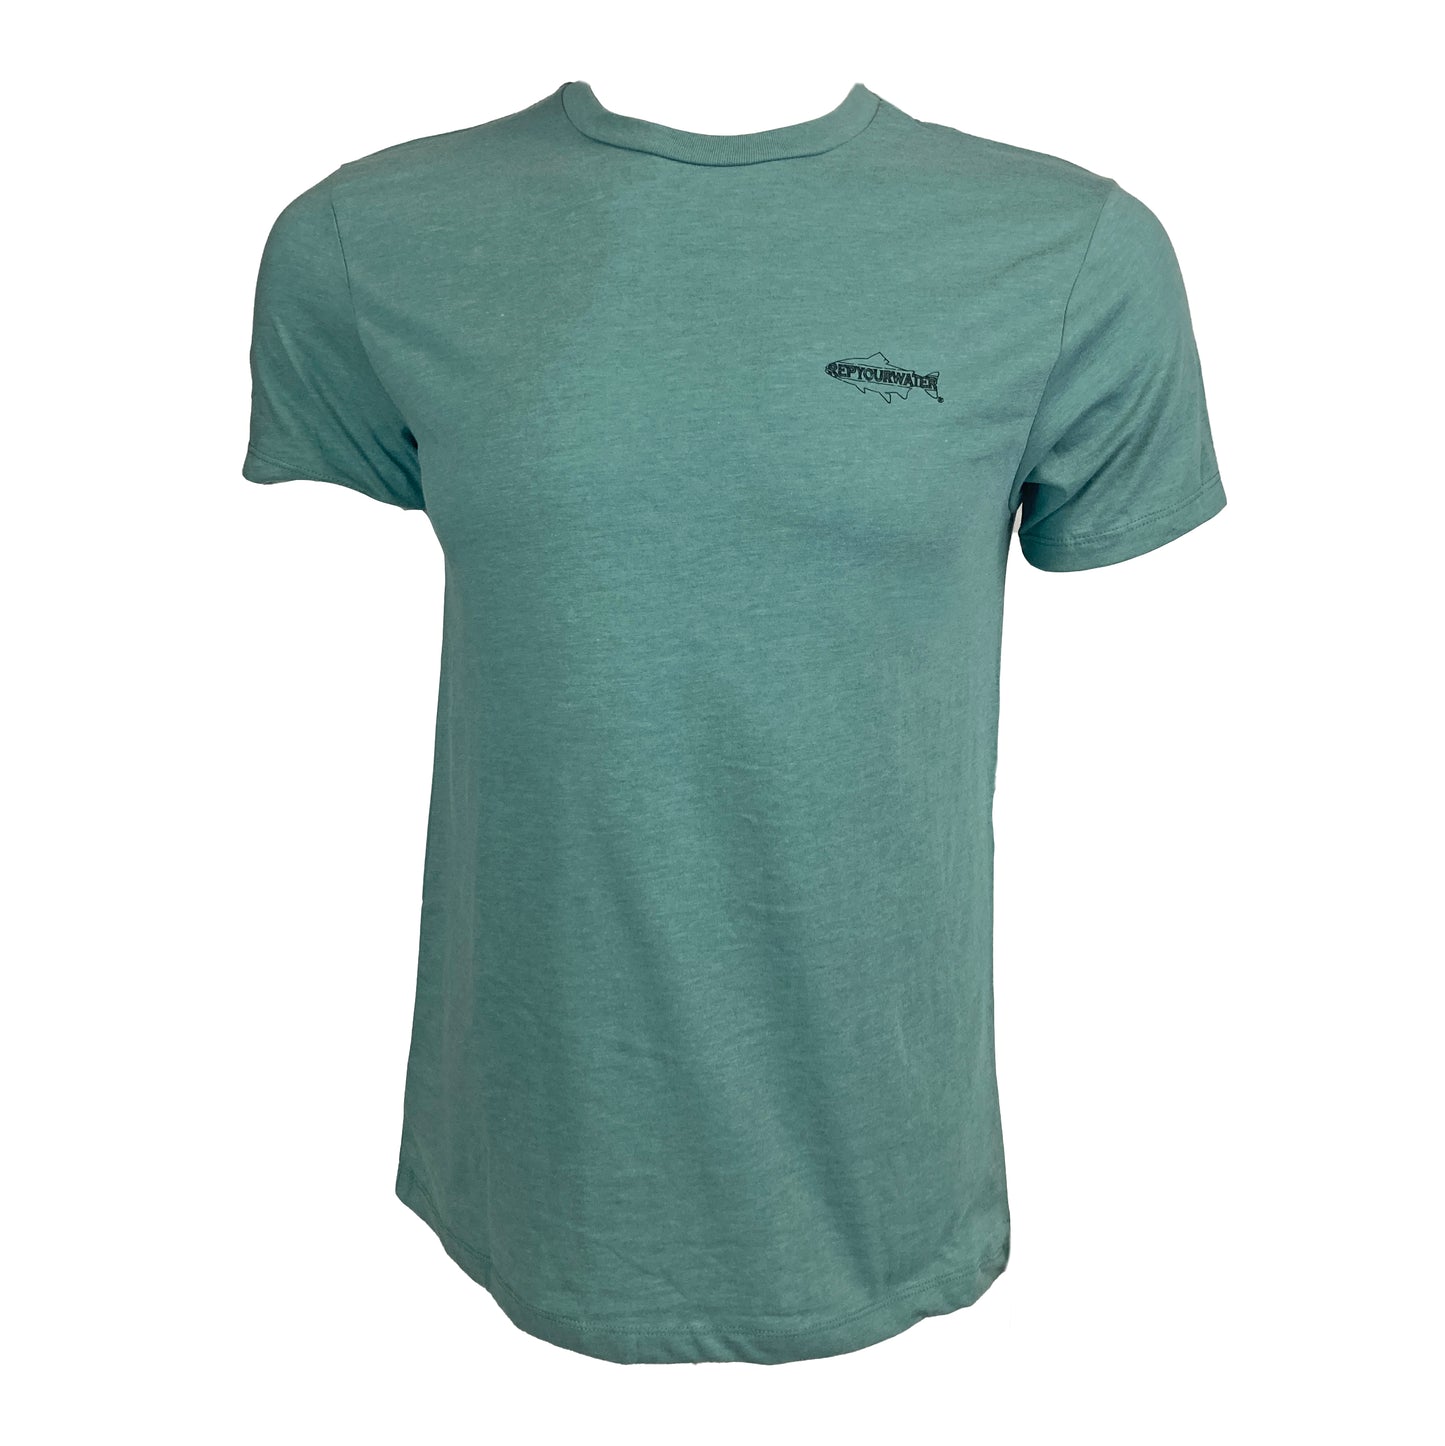 Blue green tee shown from the front with Rep Your Water logo on wearer's left chest.